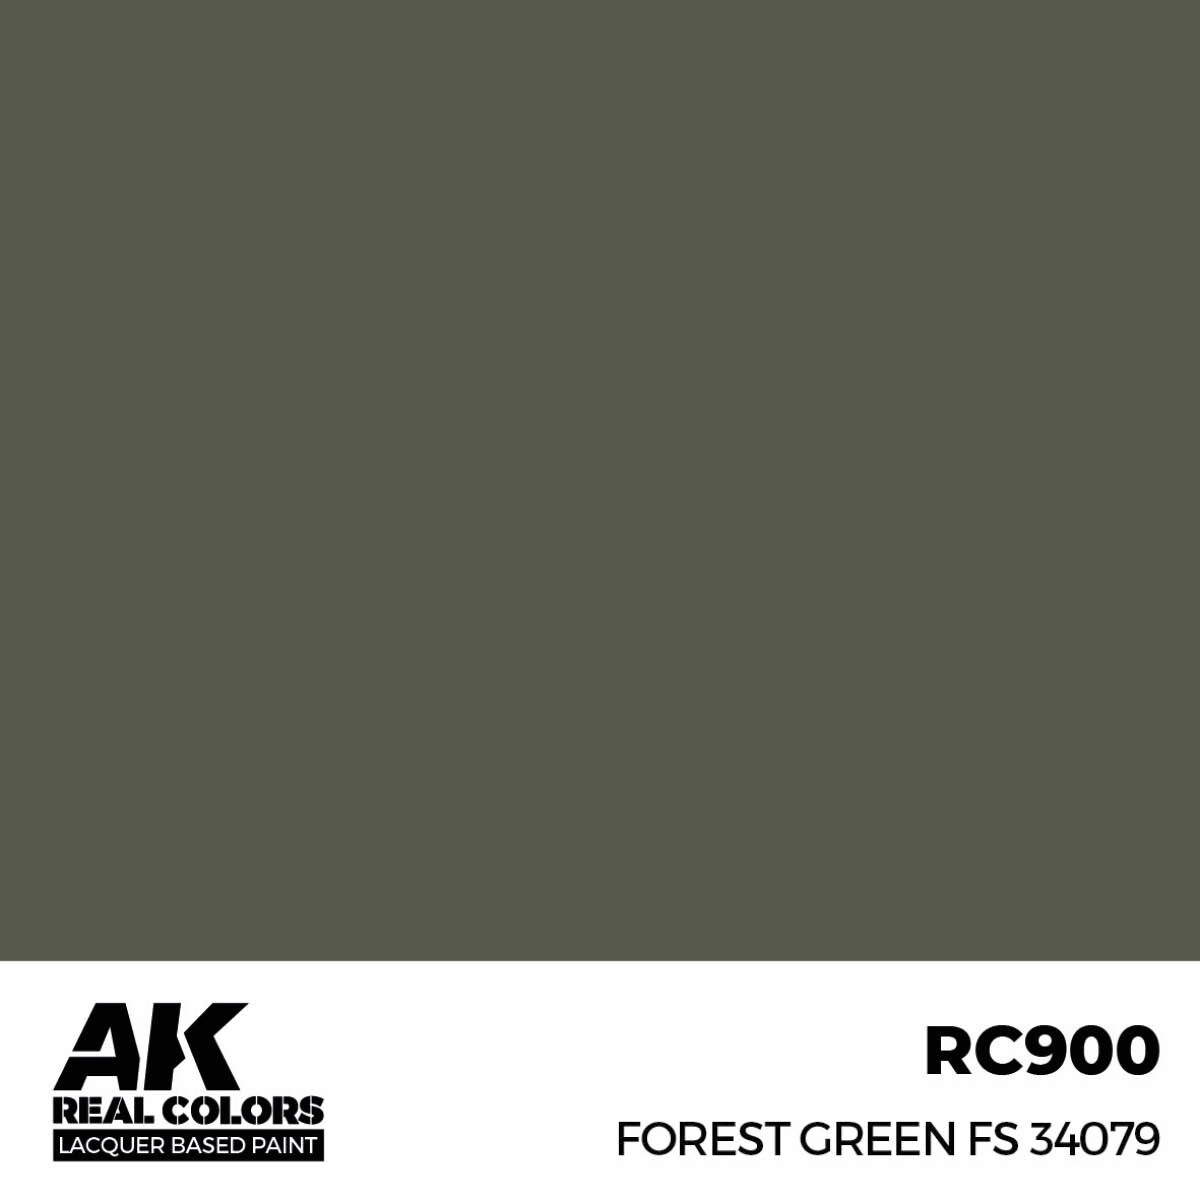 AK RC900 Real Colors Forest Green FS 34079 17 ml.